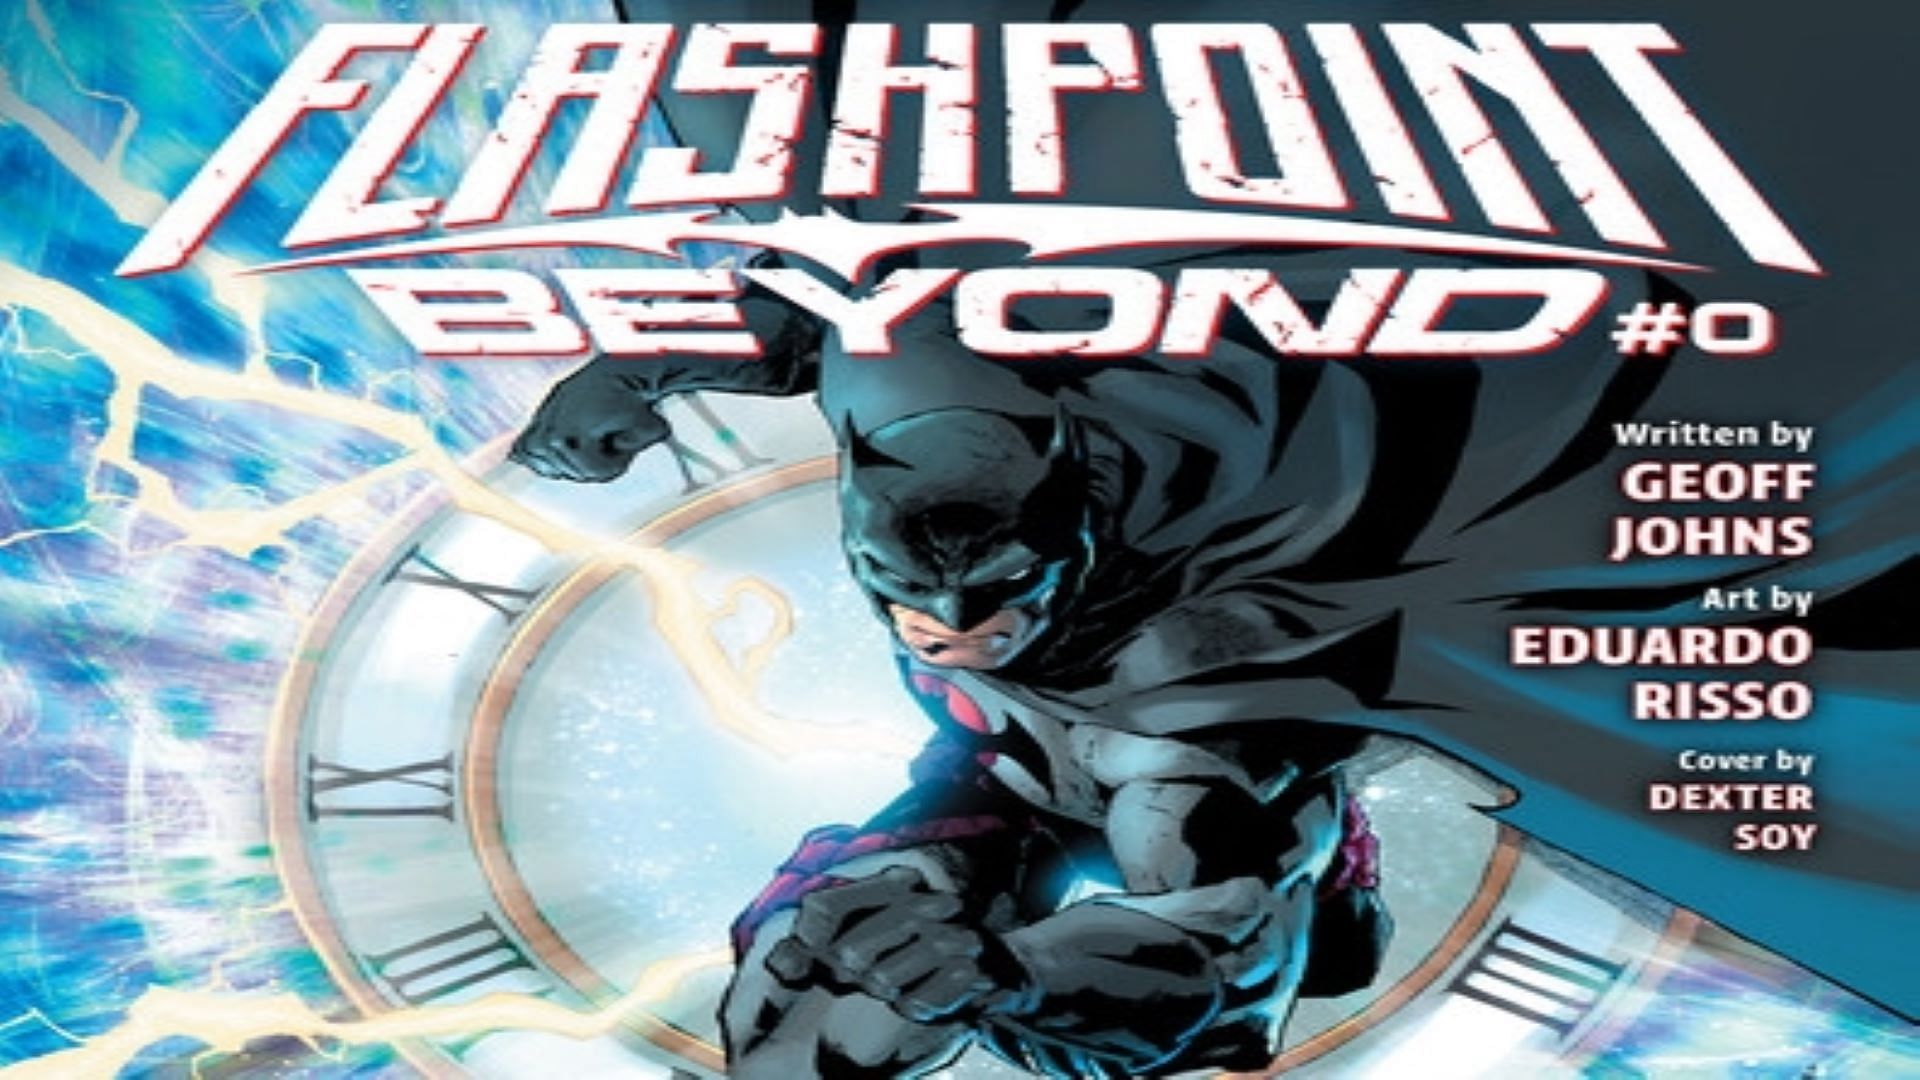 Flashpoint Beyond #0 came out on April 5 (Image via DC)